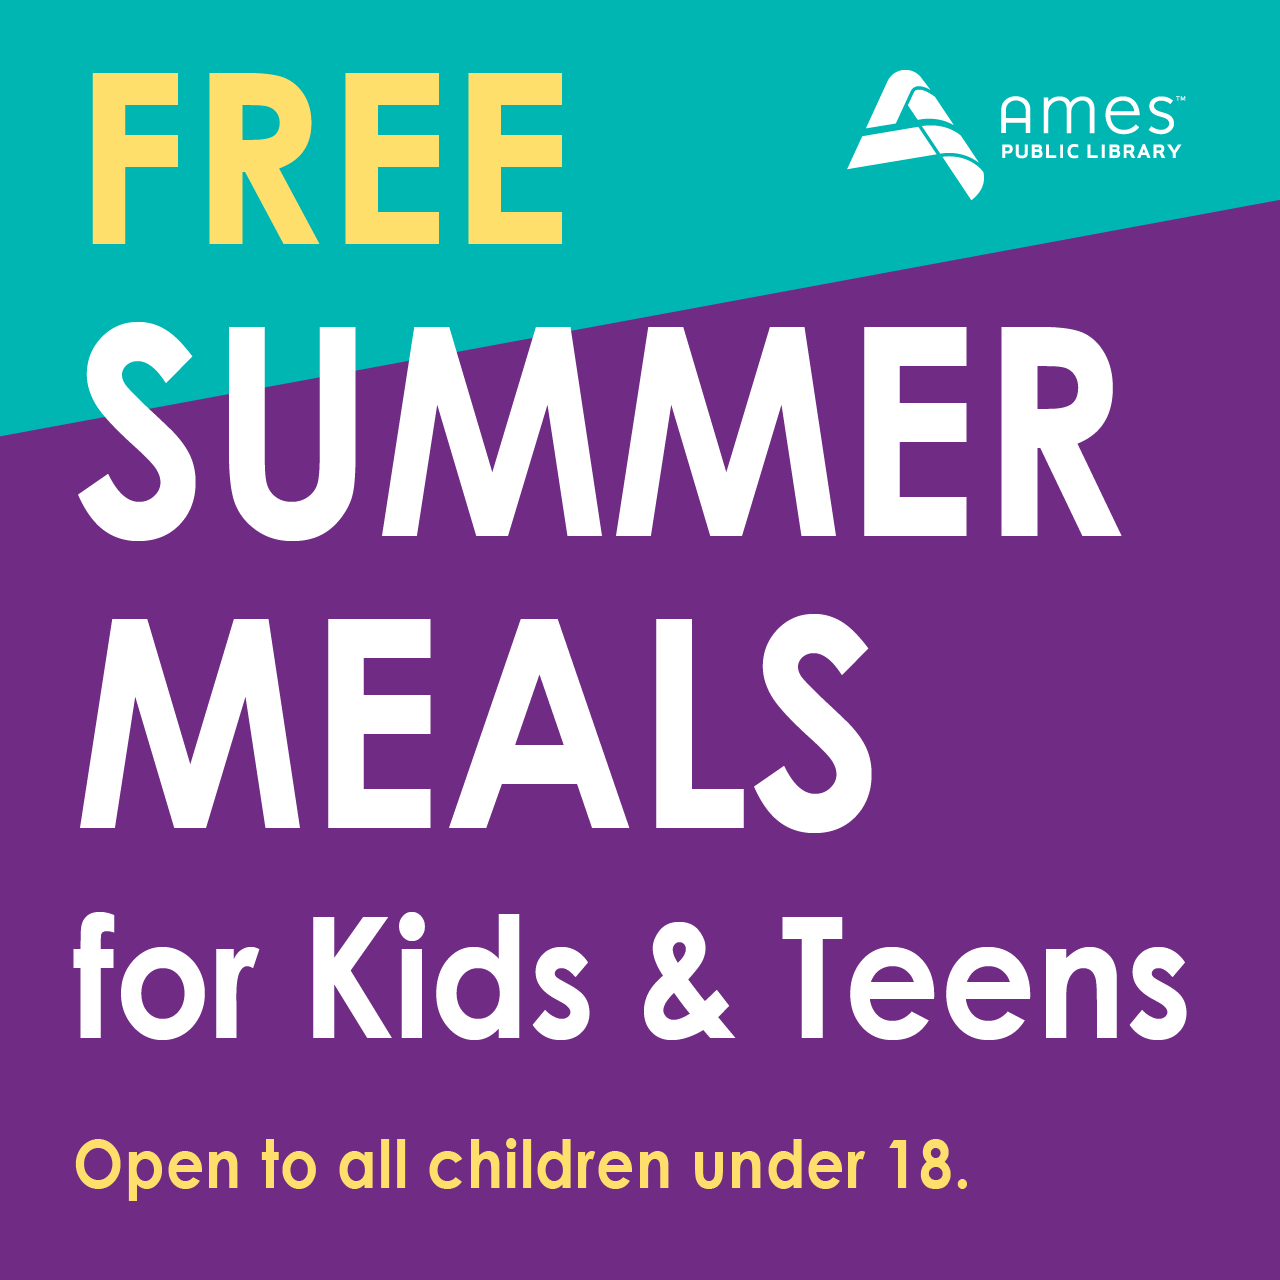 Free Summer Meals for Kids & Teens. Open to all children under 18.